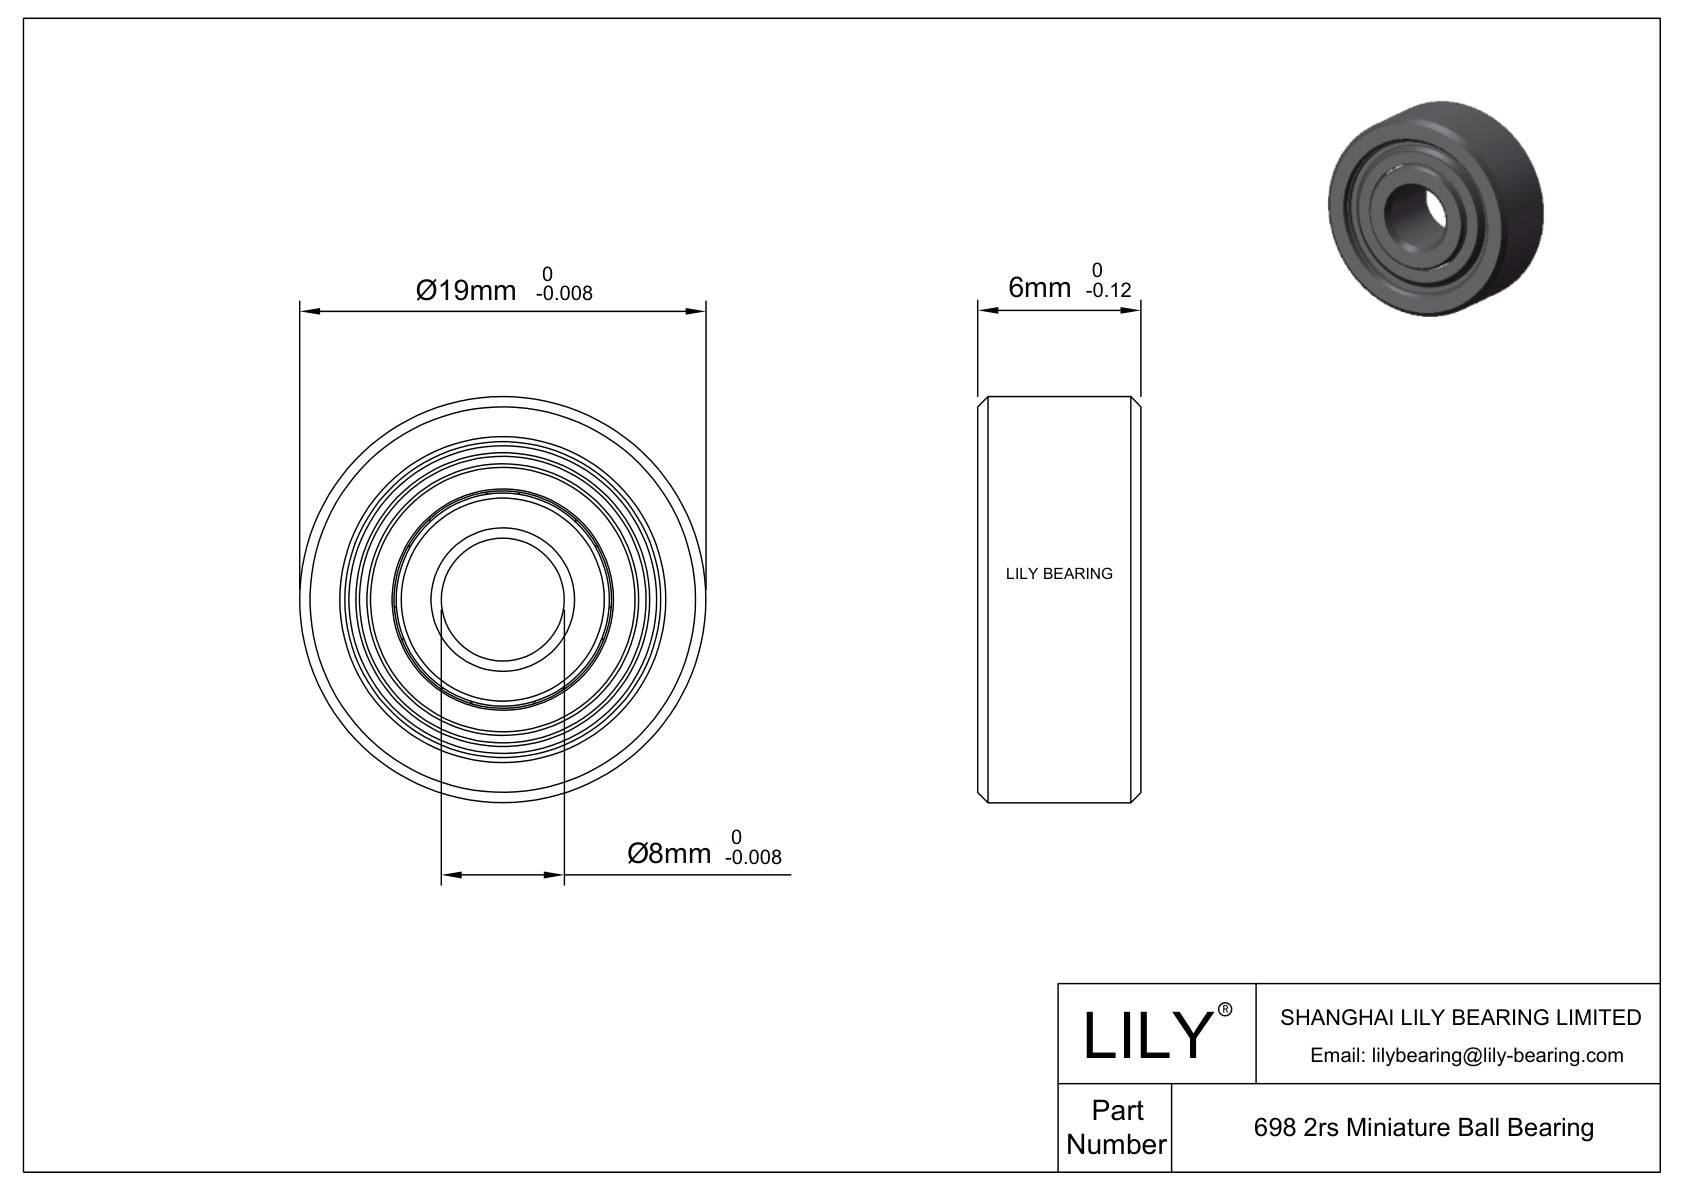 LILY-BST69835-50 Outsourcing POM bearings cad drawing